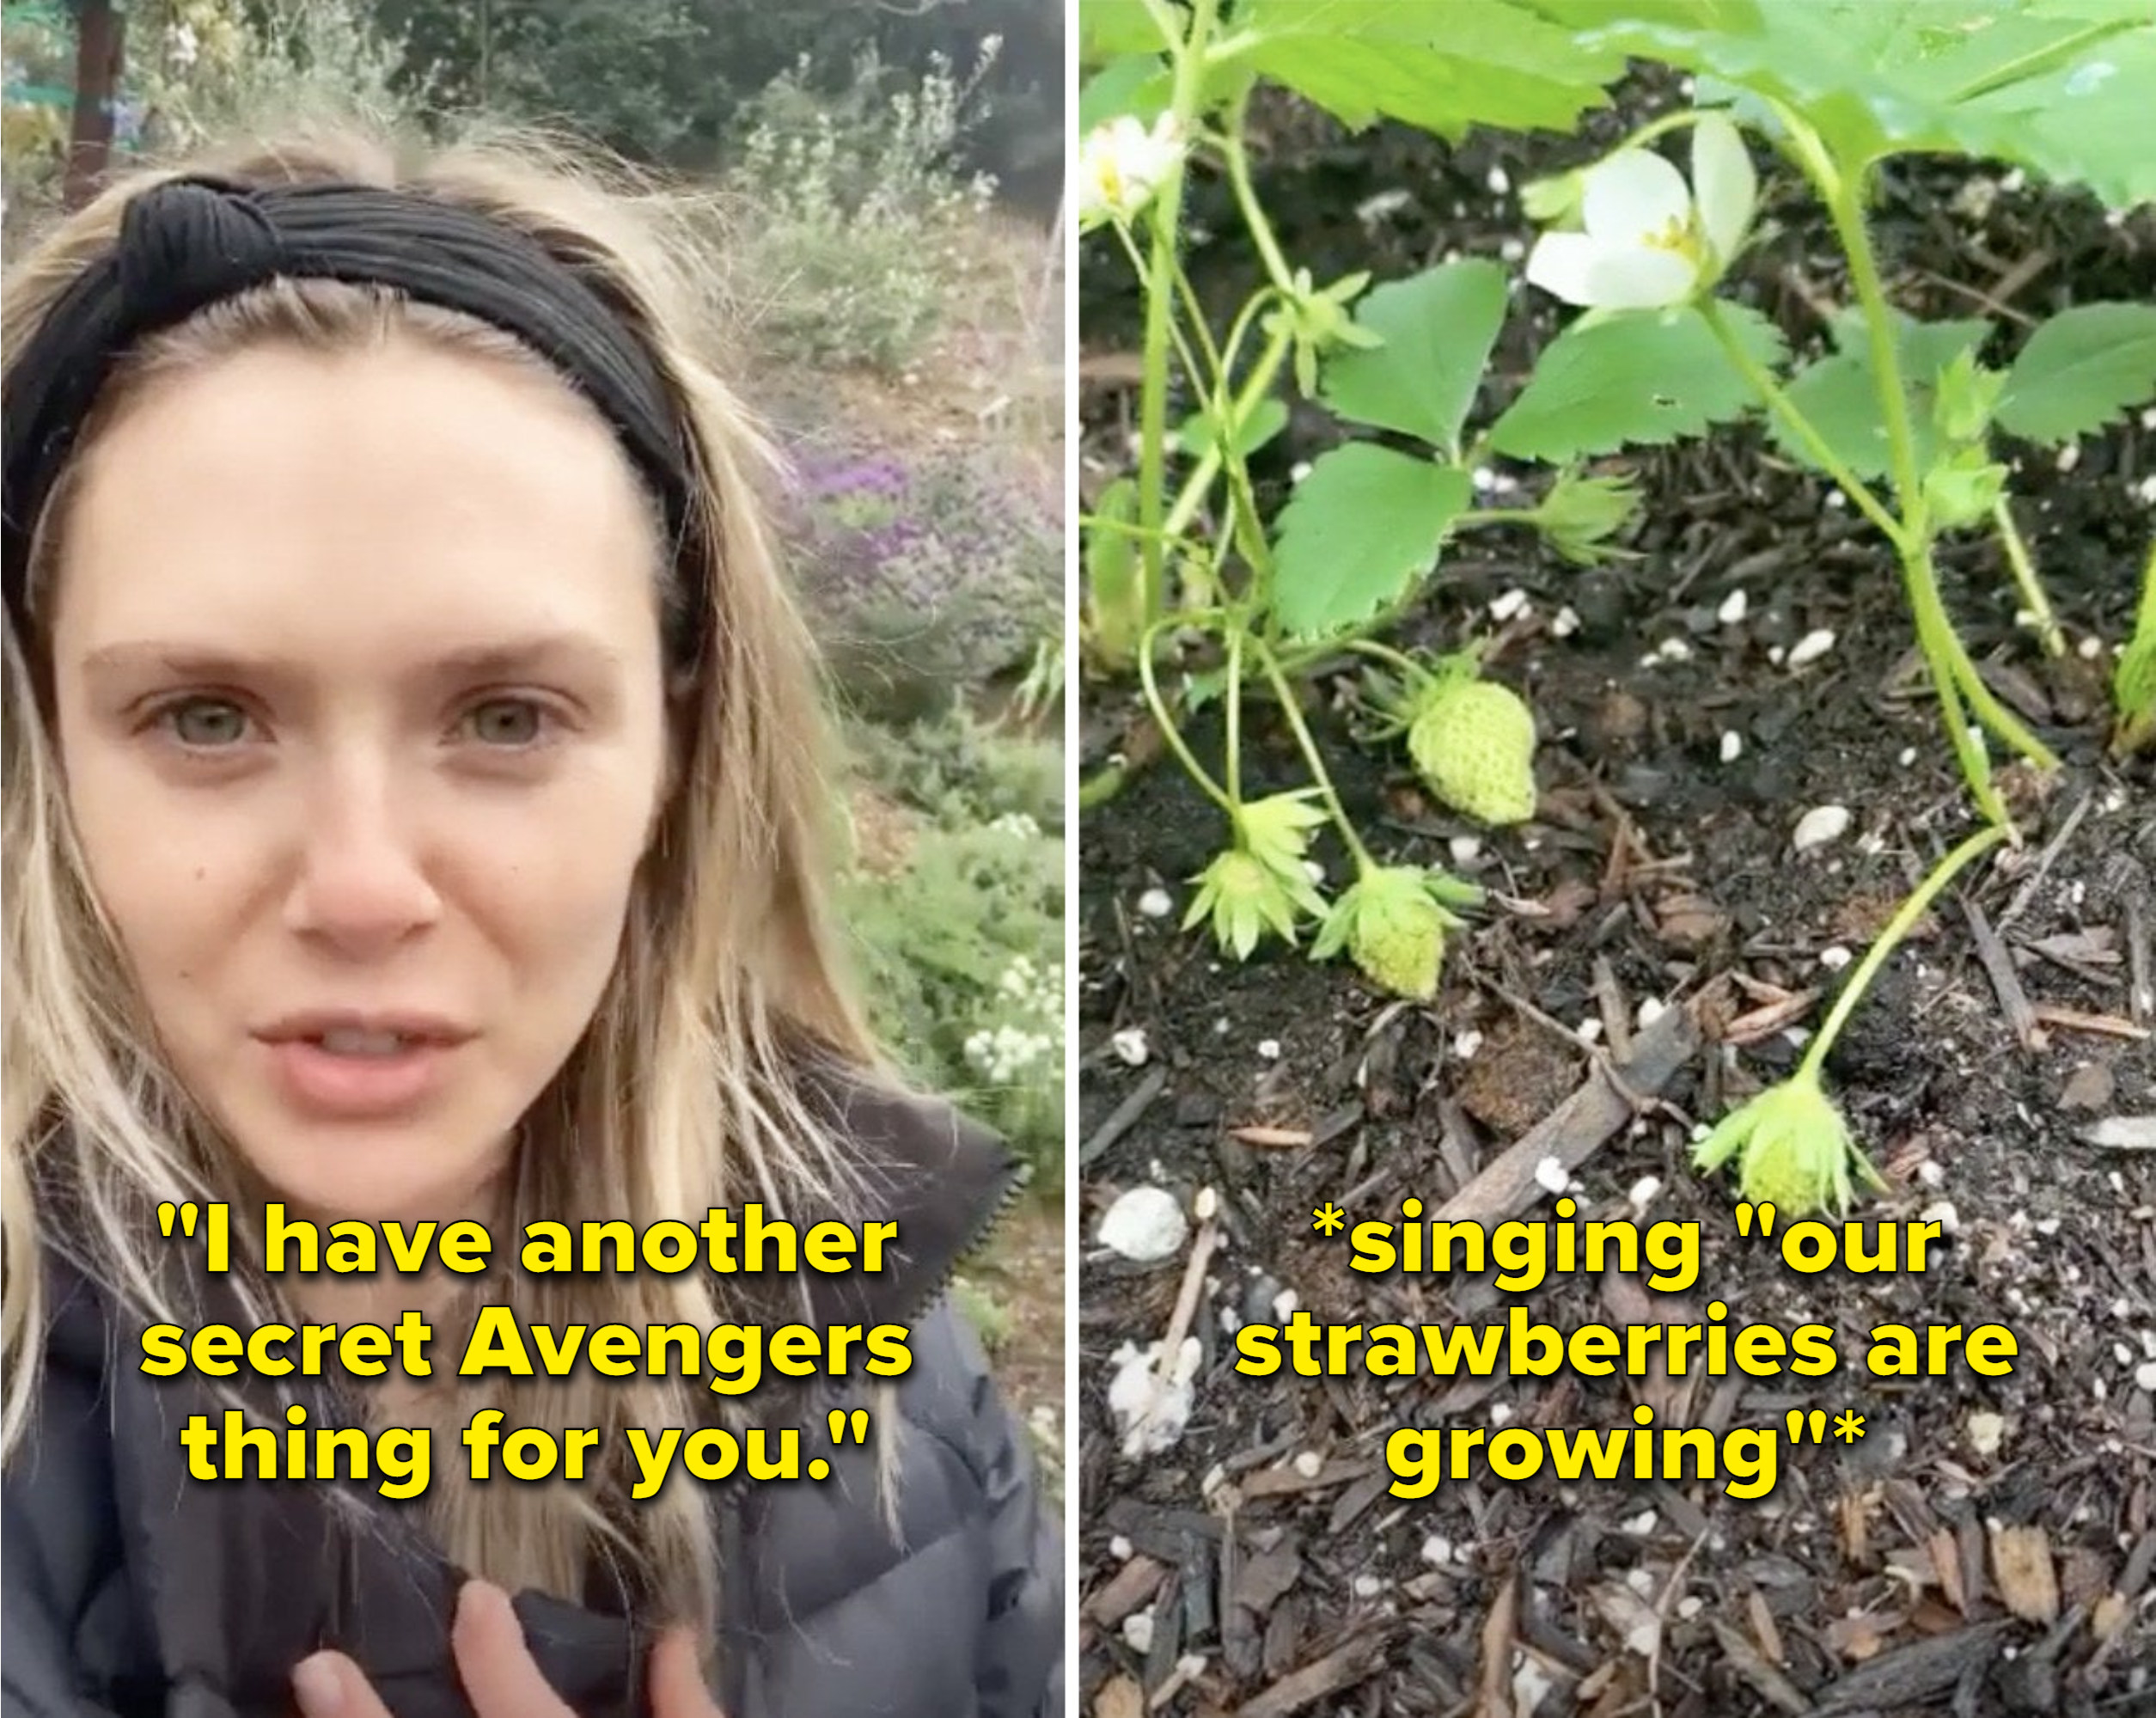 Elizabeth saying, &quot;I have another secret Avengers thing for you&quot; and then singing, &quot;Our strawberries are growing&quot;